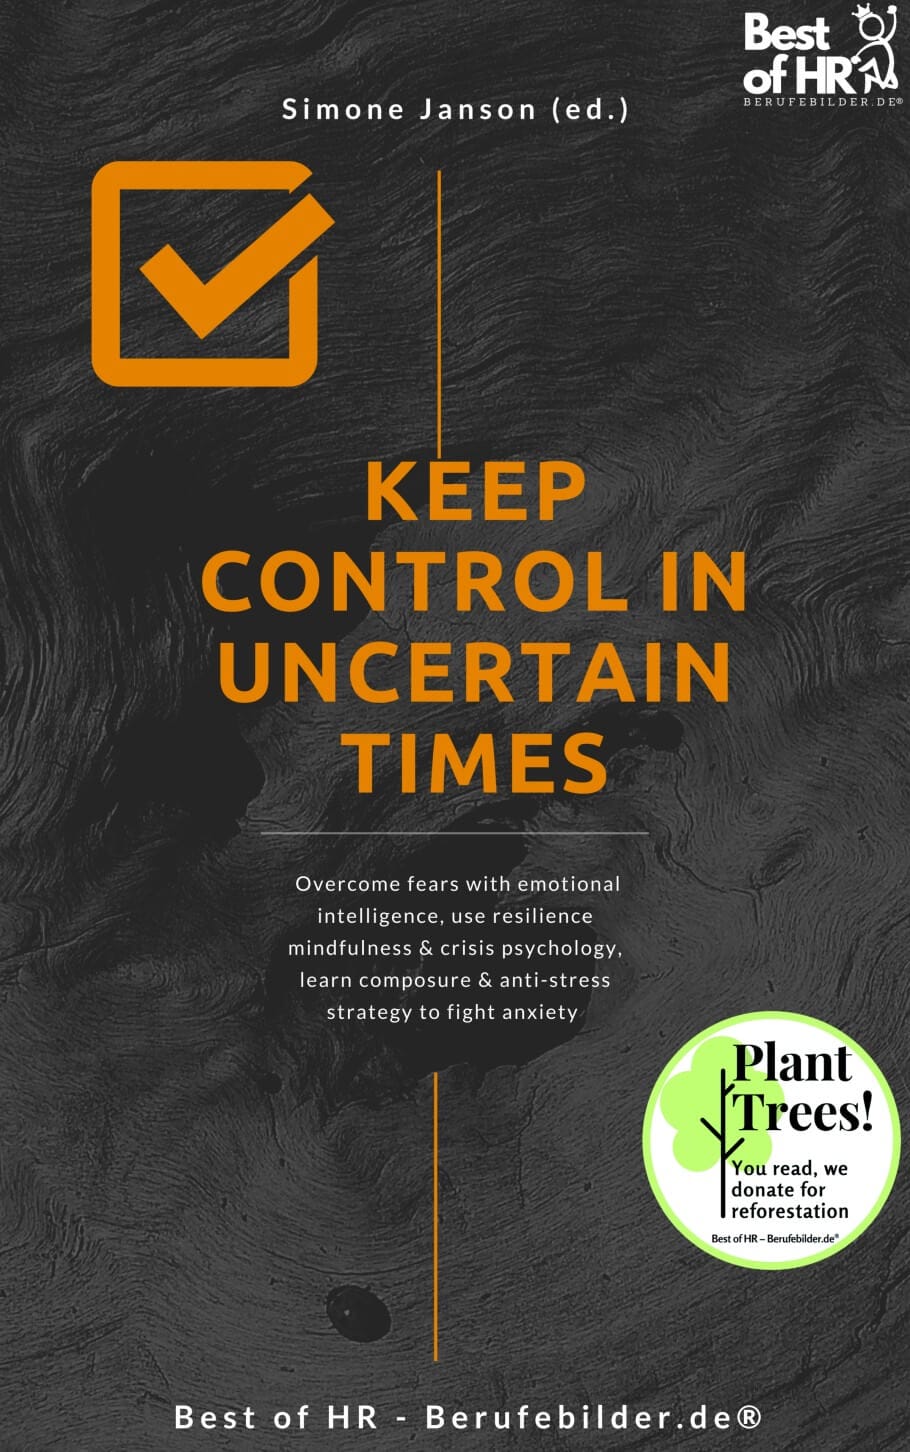 Keep Control in Uncertain Times (Engl. Version)